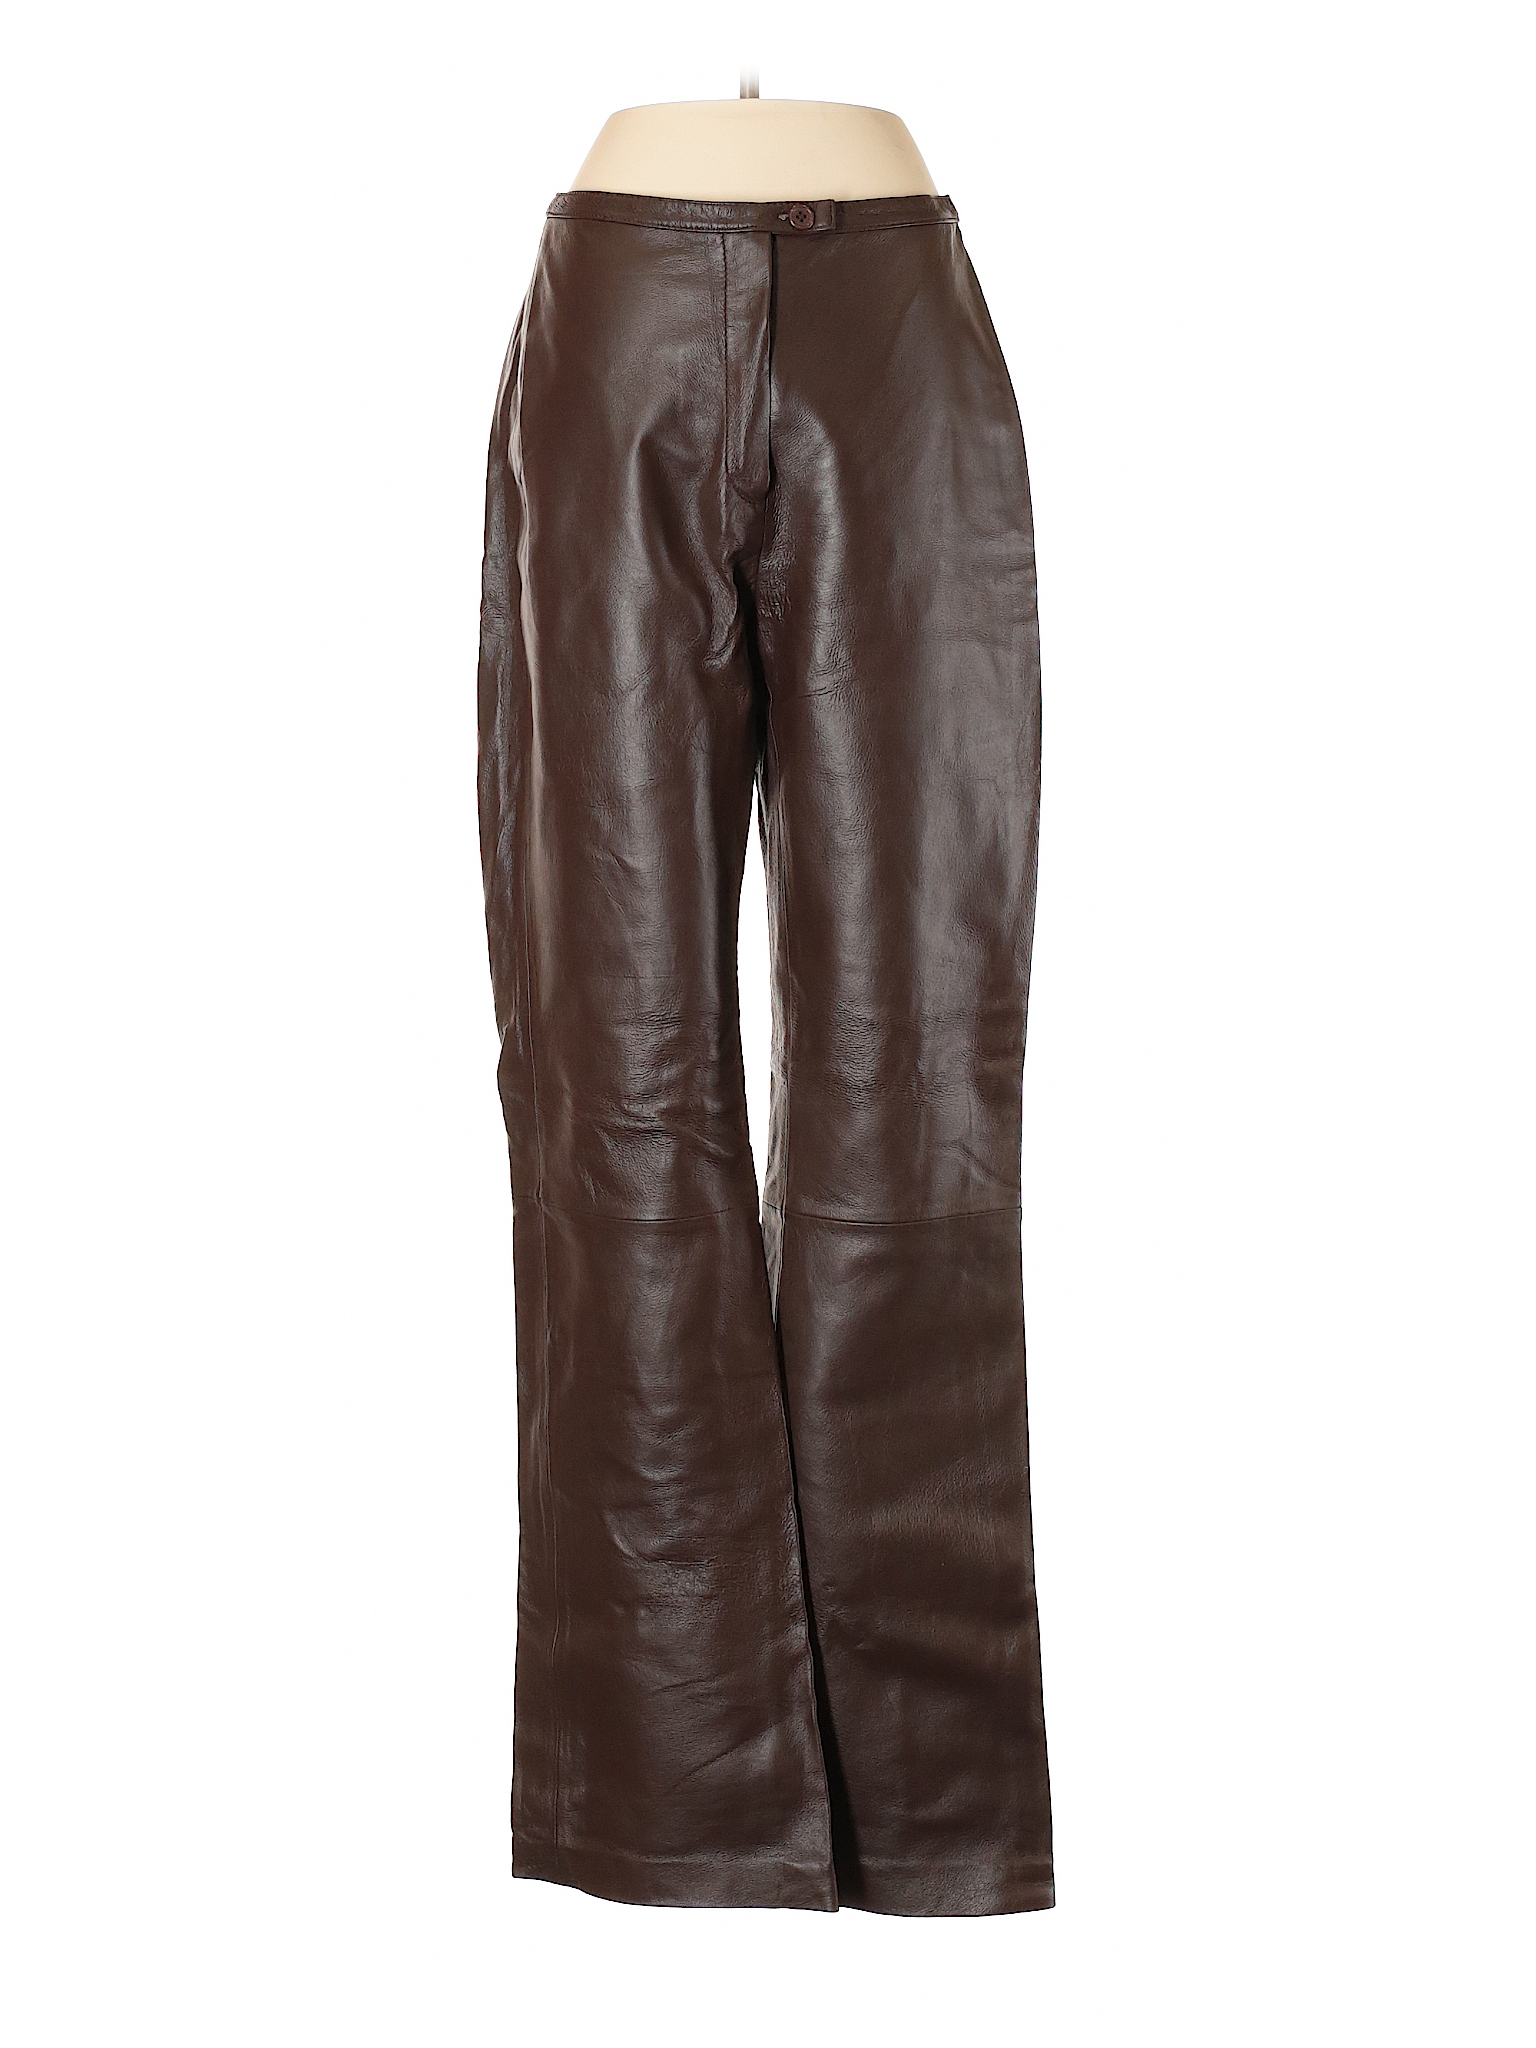 Newport News 100% Leather Solid Brown Leather Pants Size 4 - 81% off ...